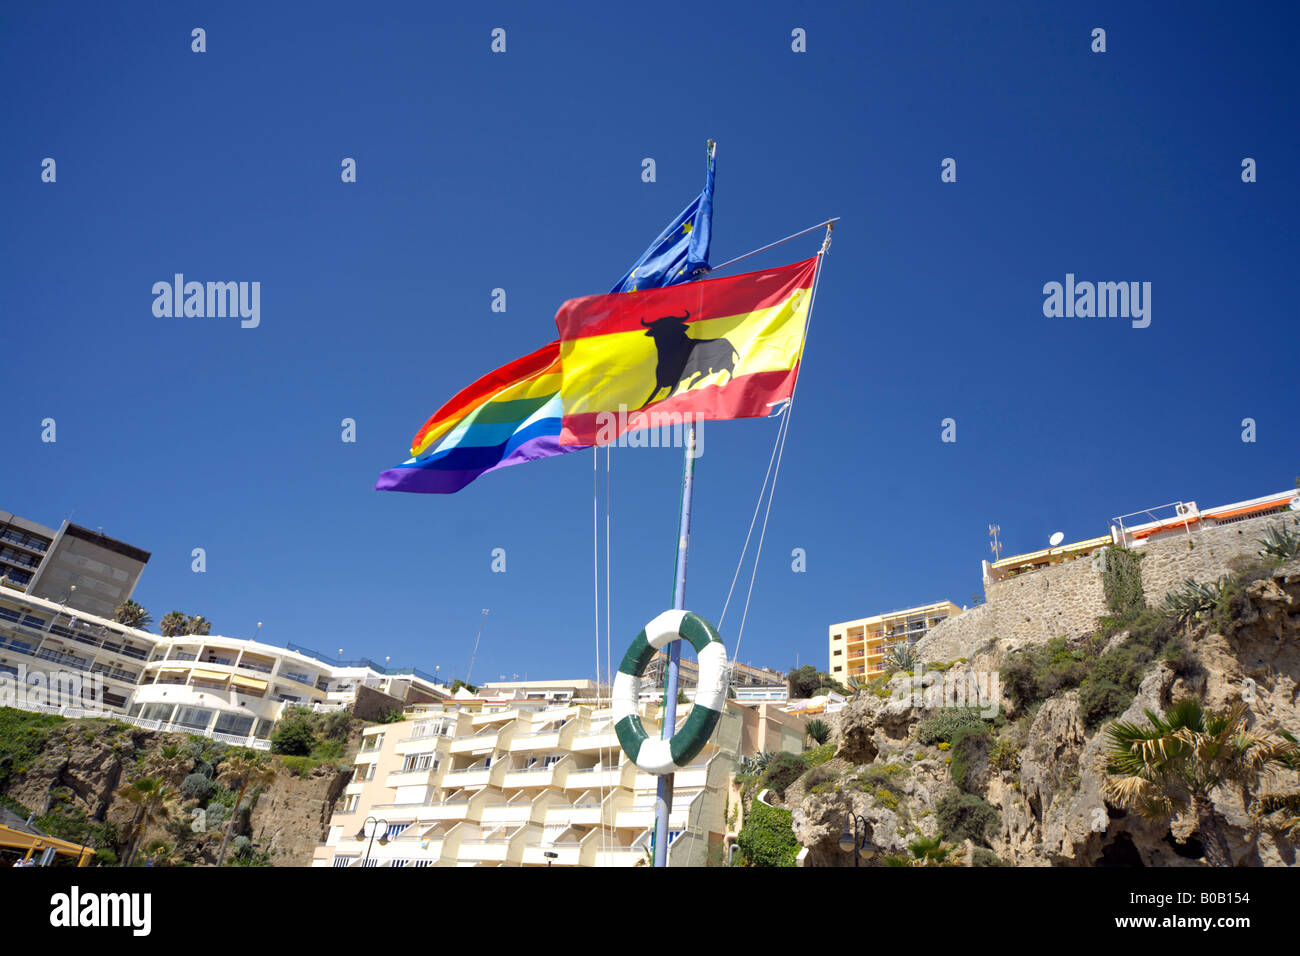 Spanish and EU flags flying on the beach at Torremolinos, Costa del Sol, Spain Stock Photo